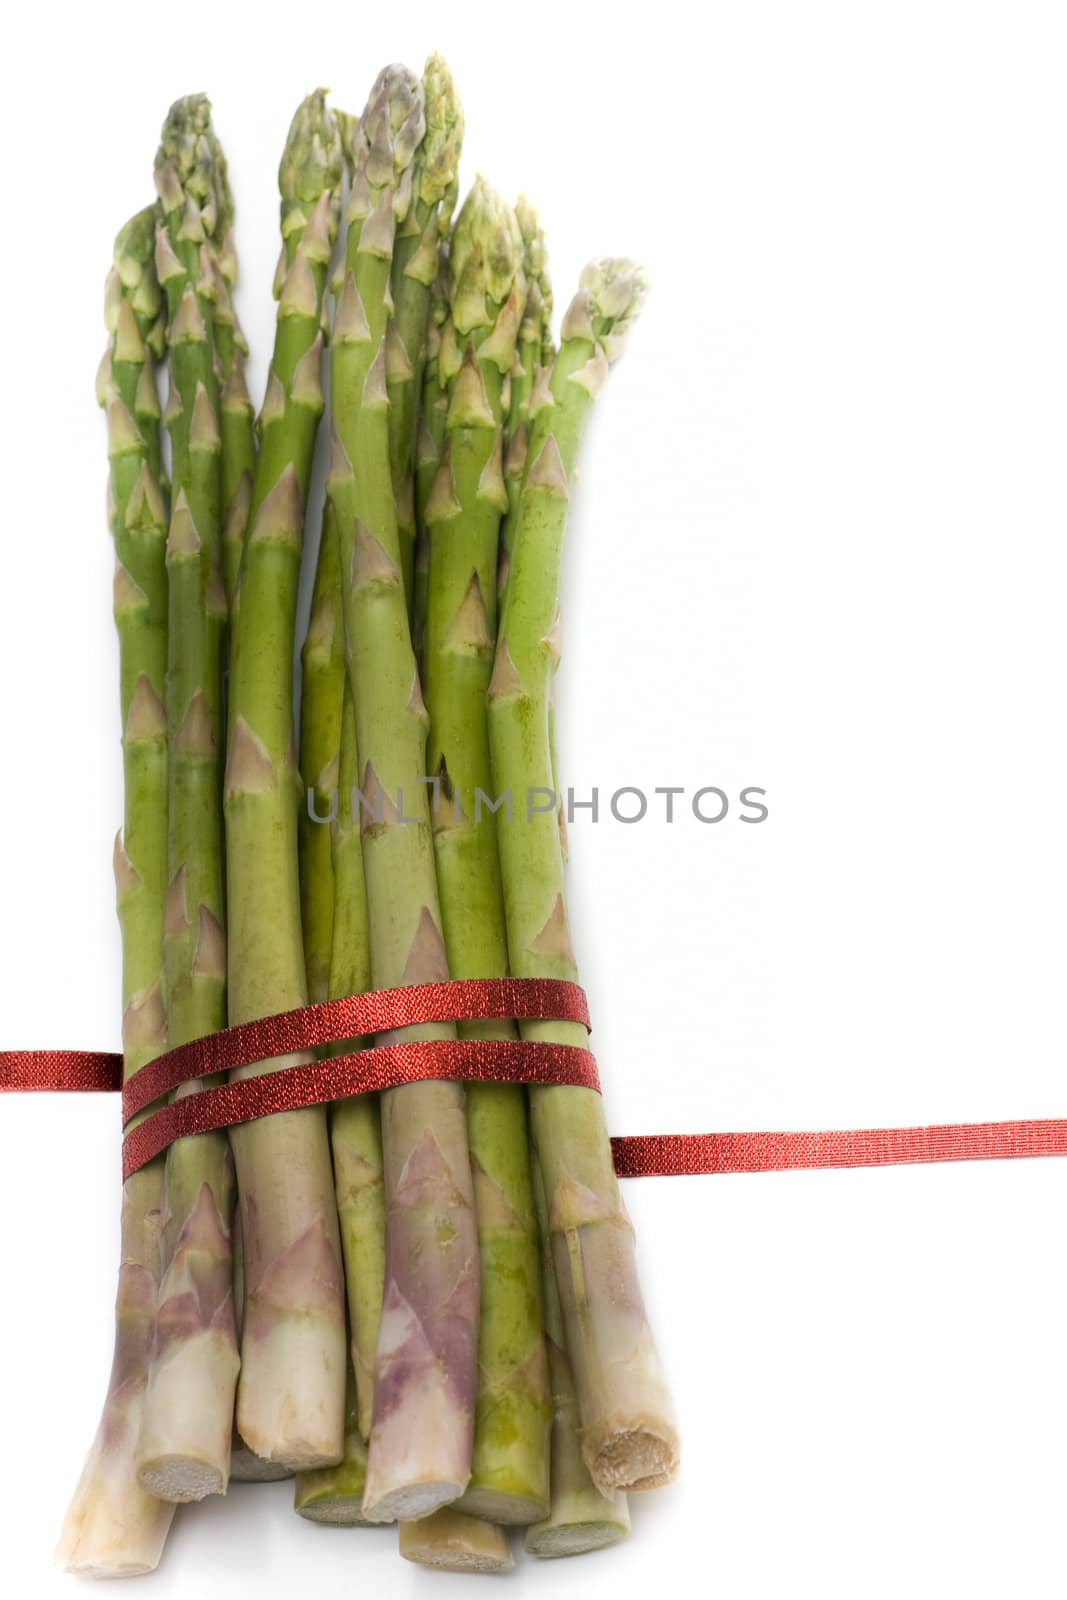 Asparagus with ribbon isolated on white by woodygraphs